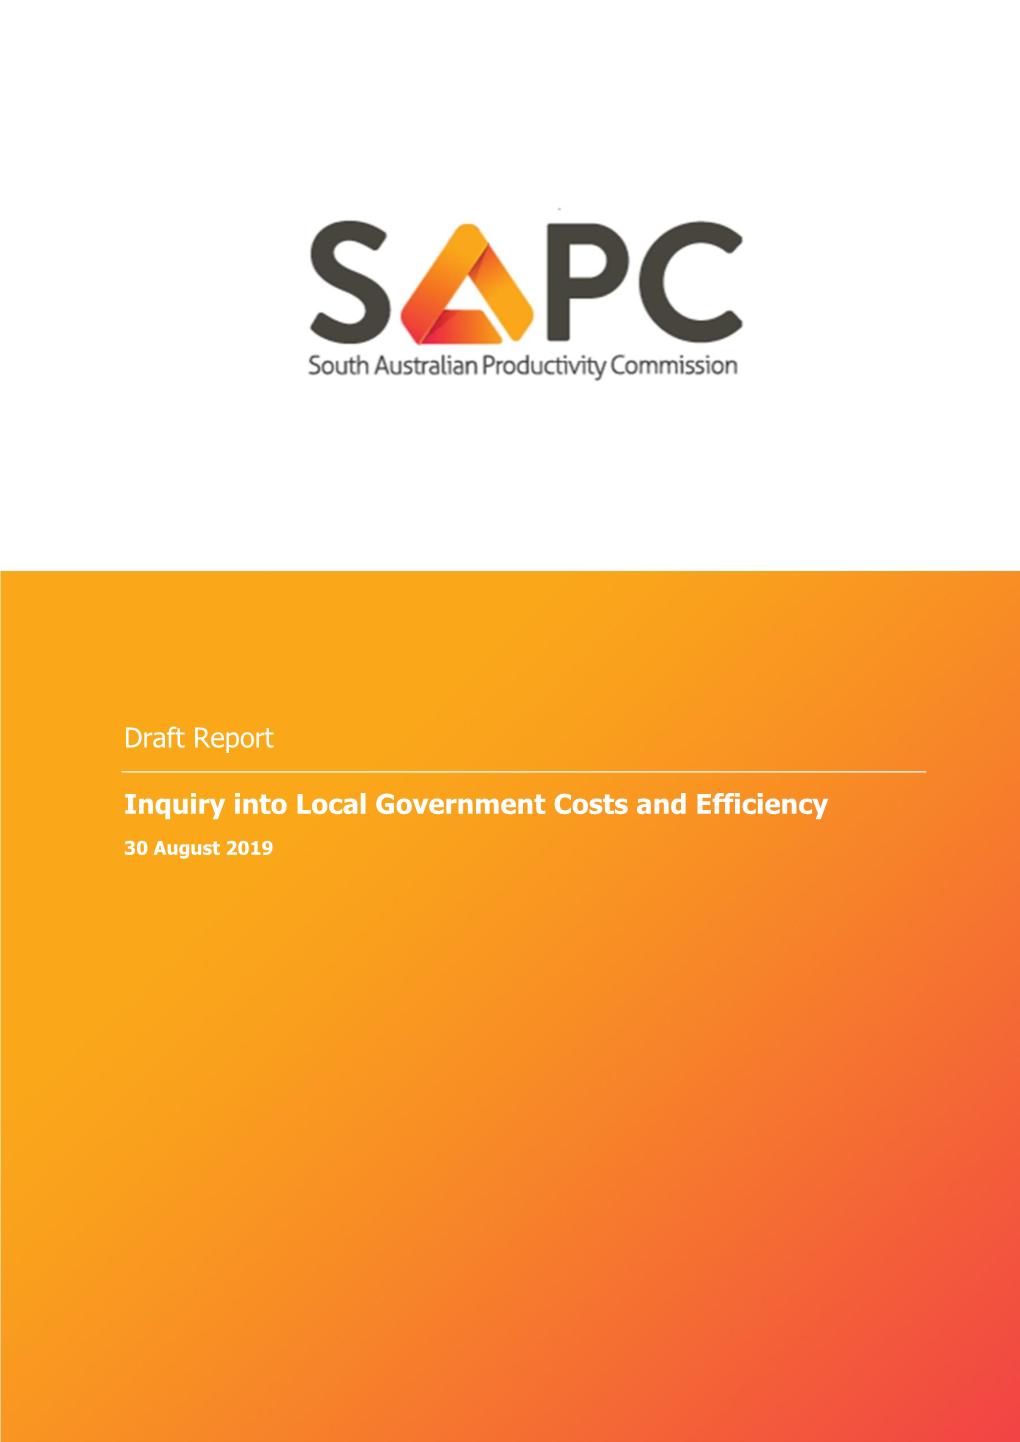 Draft Report Inquiry Into Local Government Costs and Efficiency